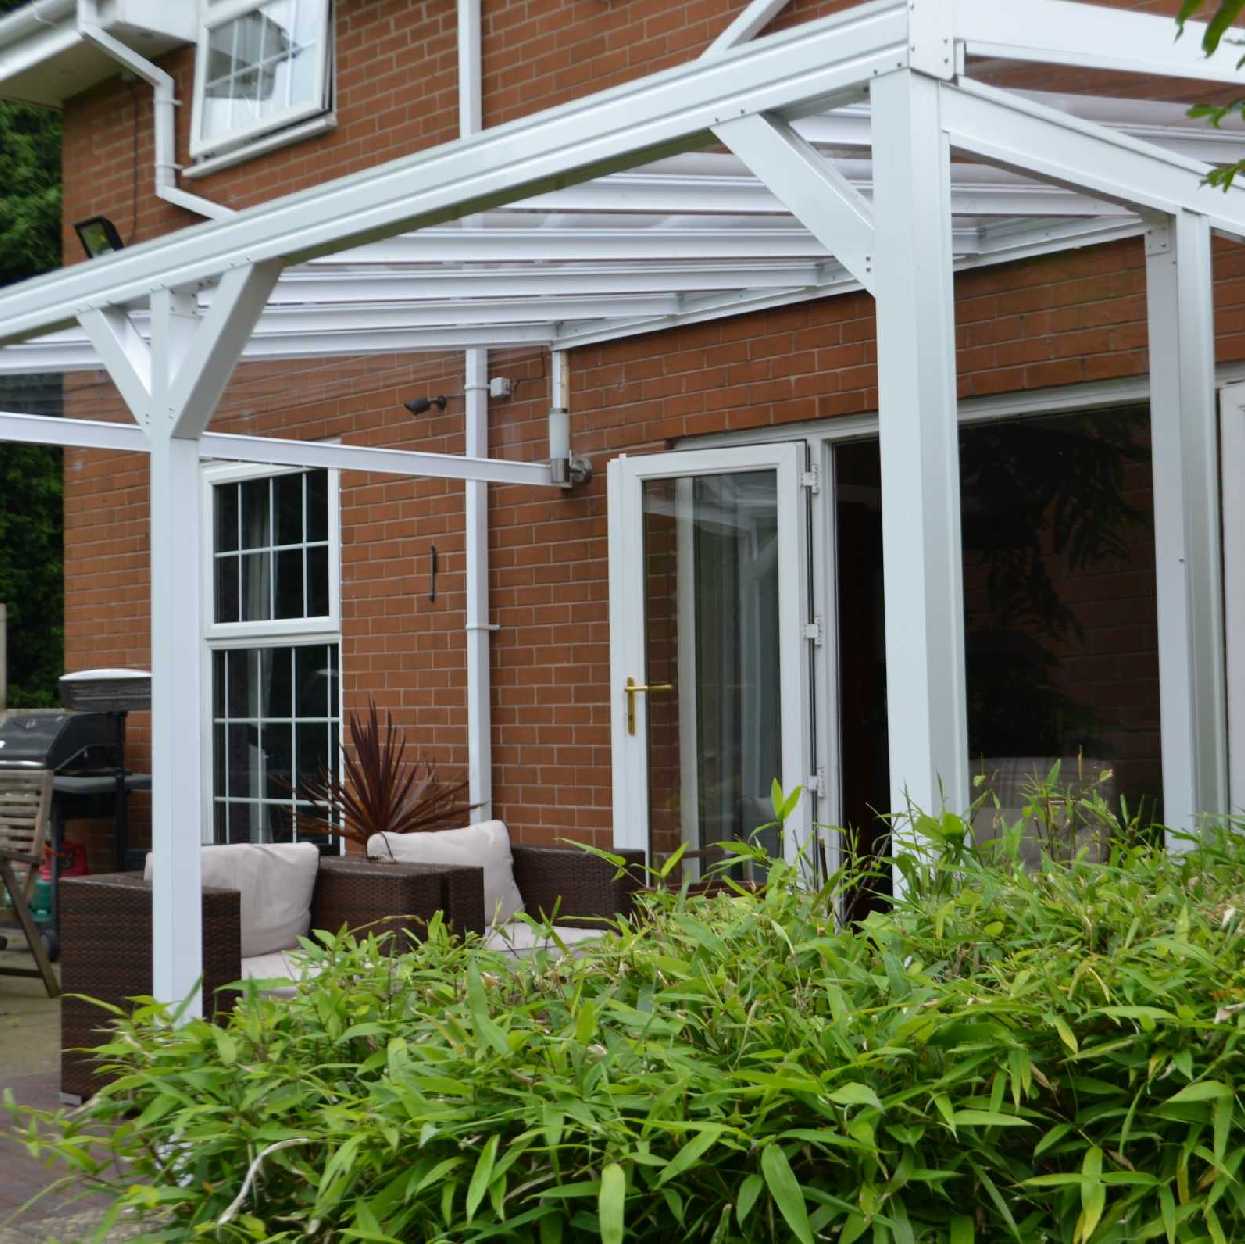 Omega Smart Lean-To Canopy, White UNGLAZED for 6mm Glazing - 3.5m (W) x 1.5m (P), (3) Supporting Posts from Omega Build